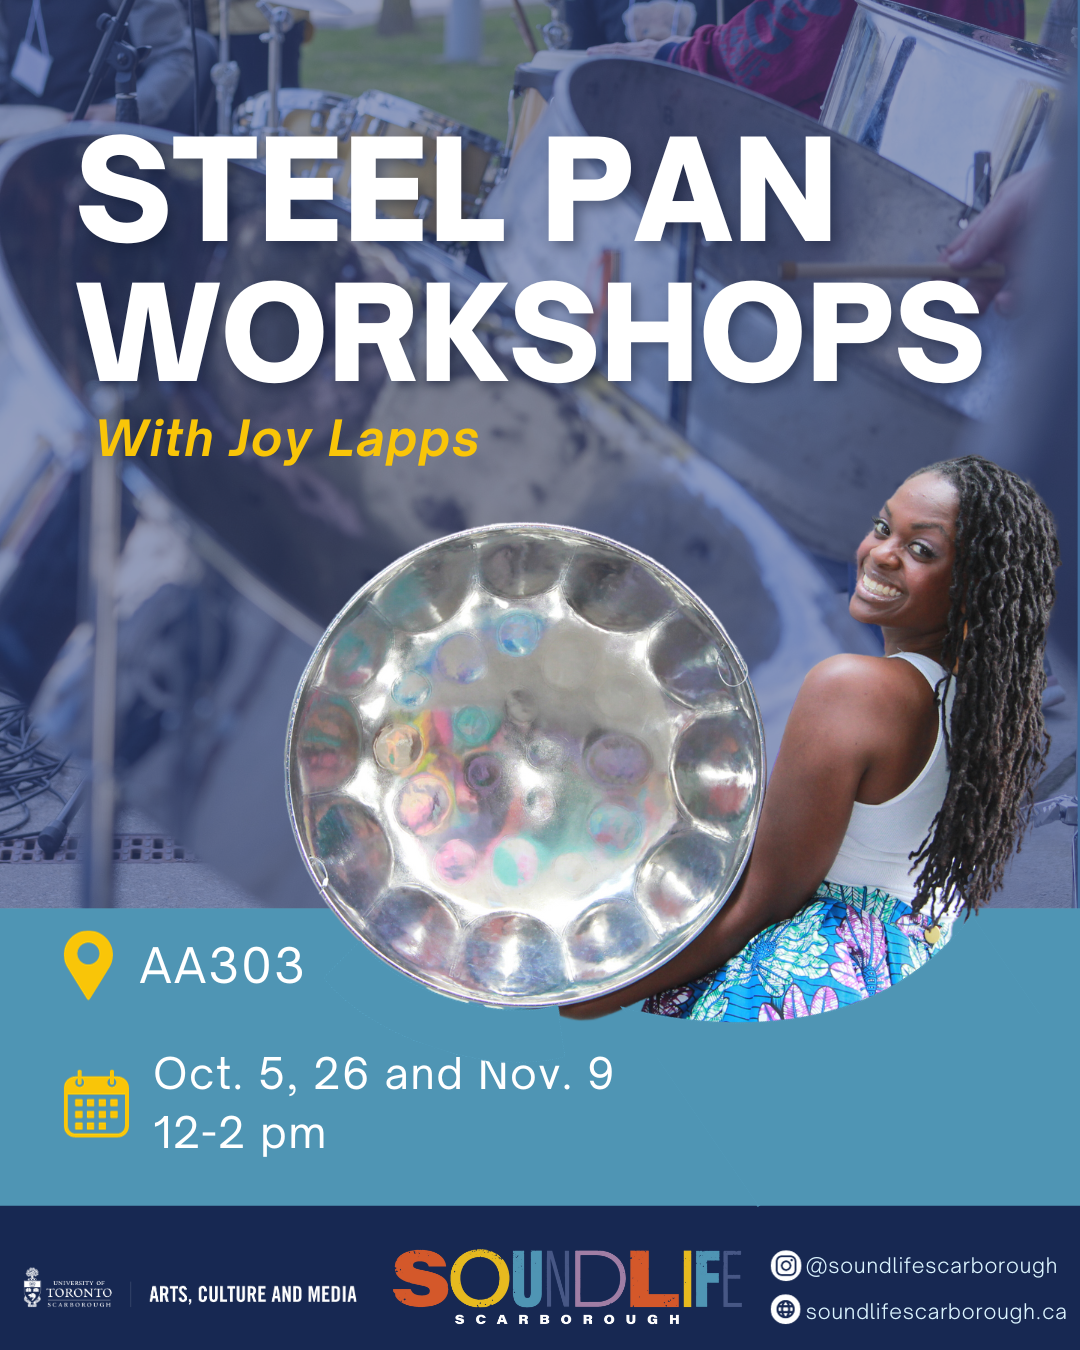 Joy Lapps holding up a steel pan with a background of steel pans in the background with details of the event listed on the webpage